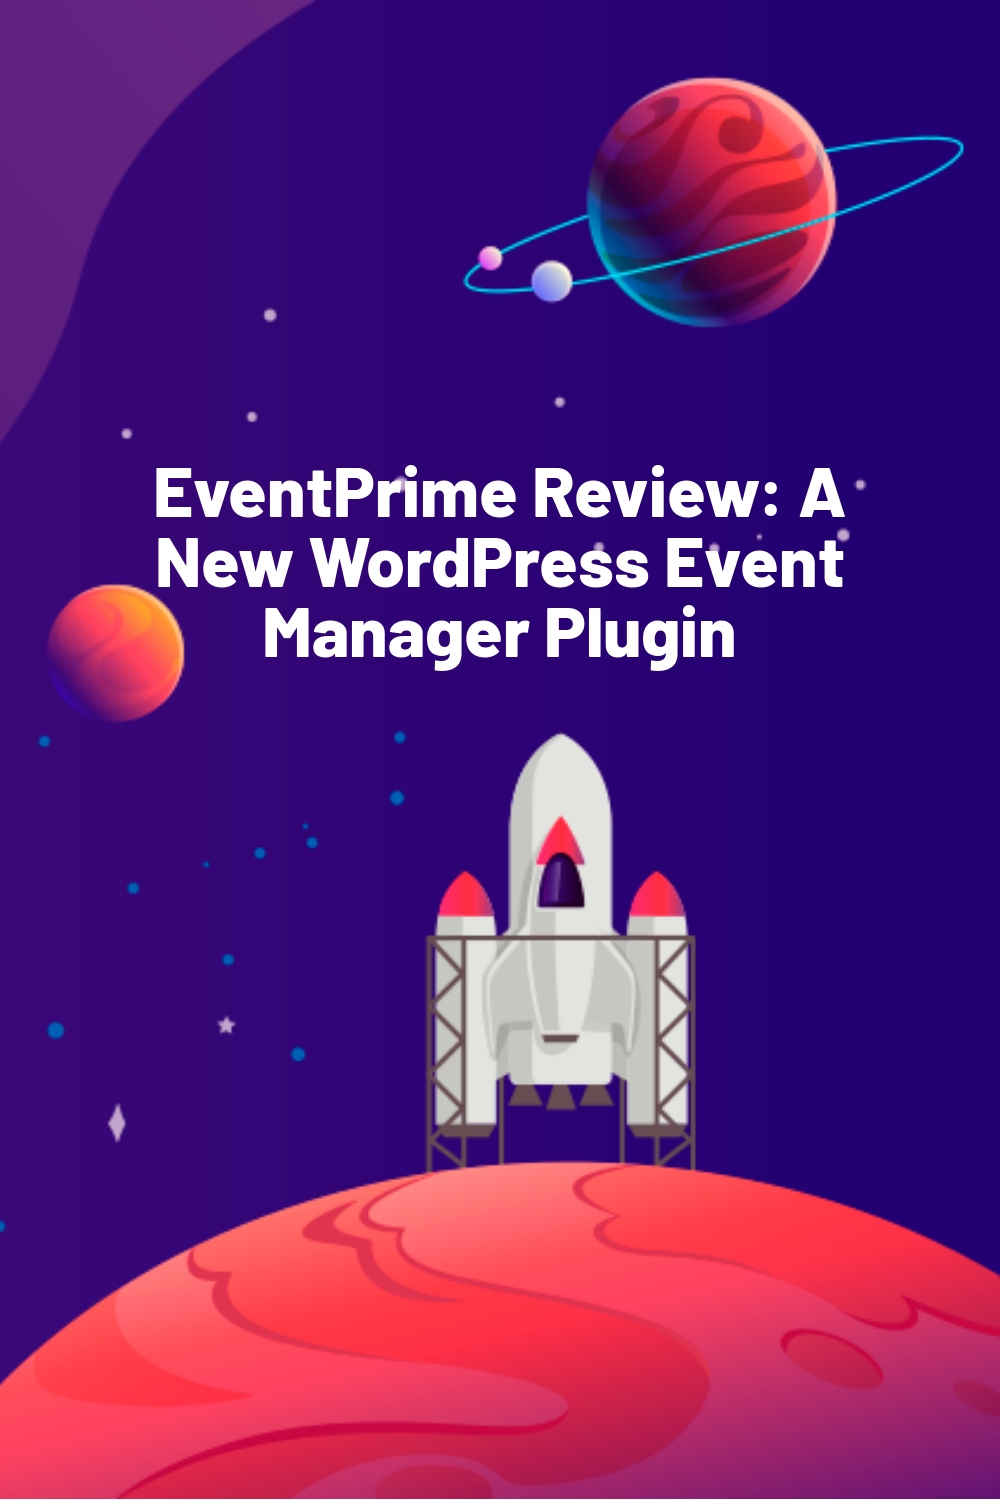 EventPrime Review: A New WordPress Event Manager Plugin